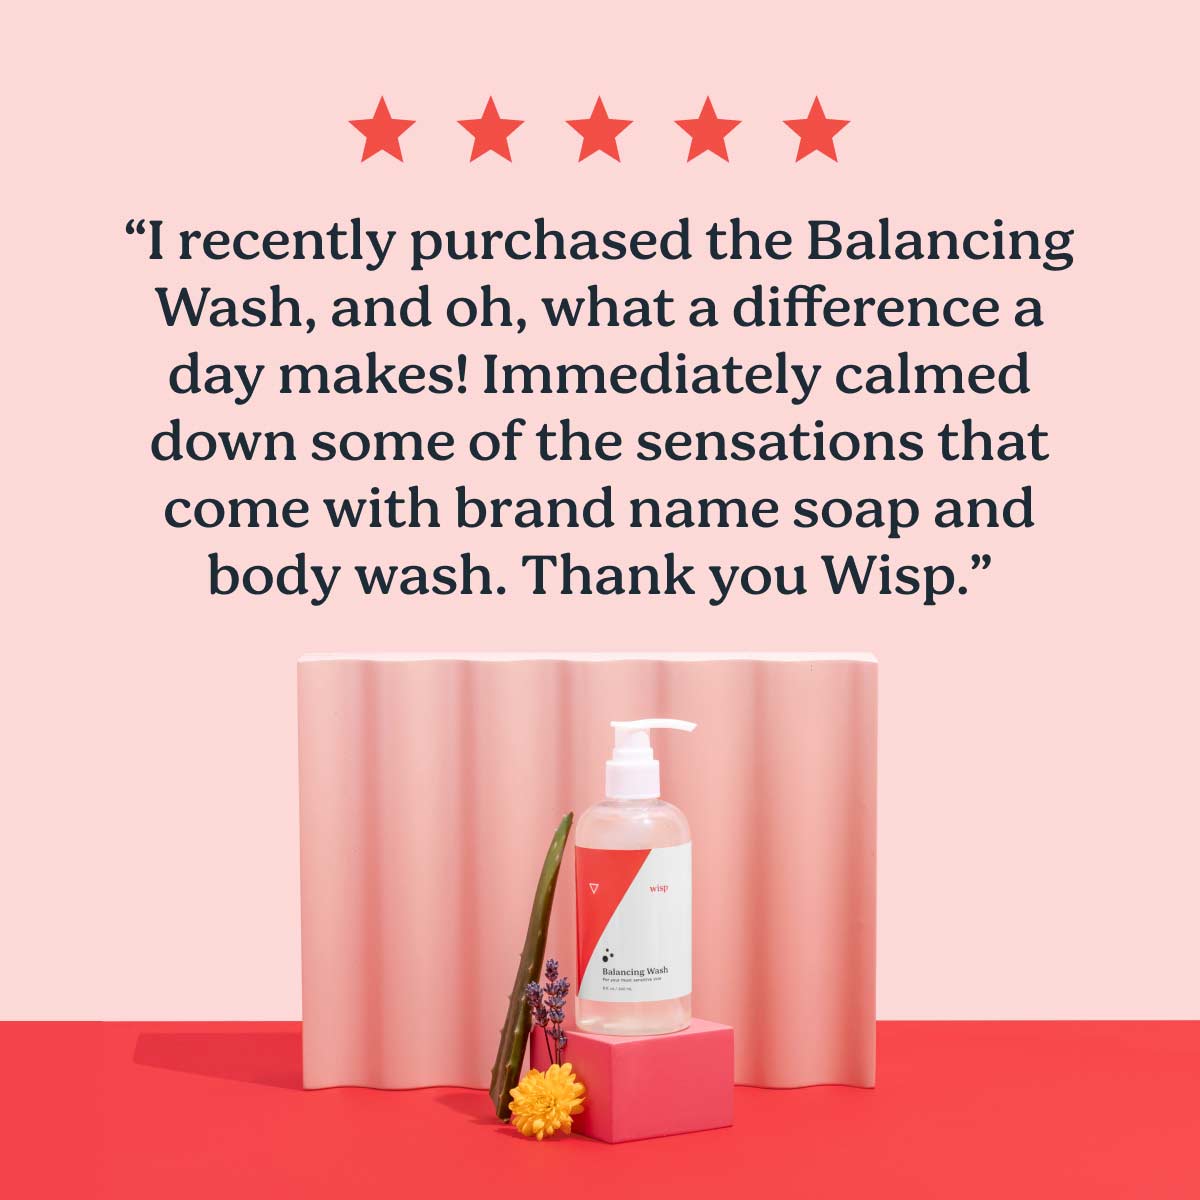 5 star customer review for Balancing Wash with colorful product imagery in the background